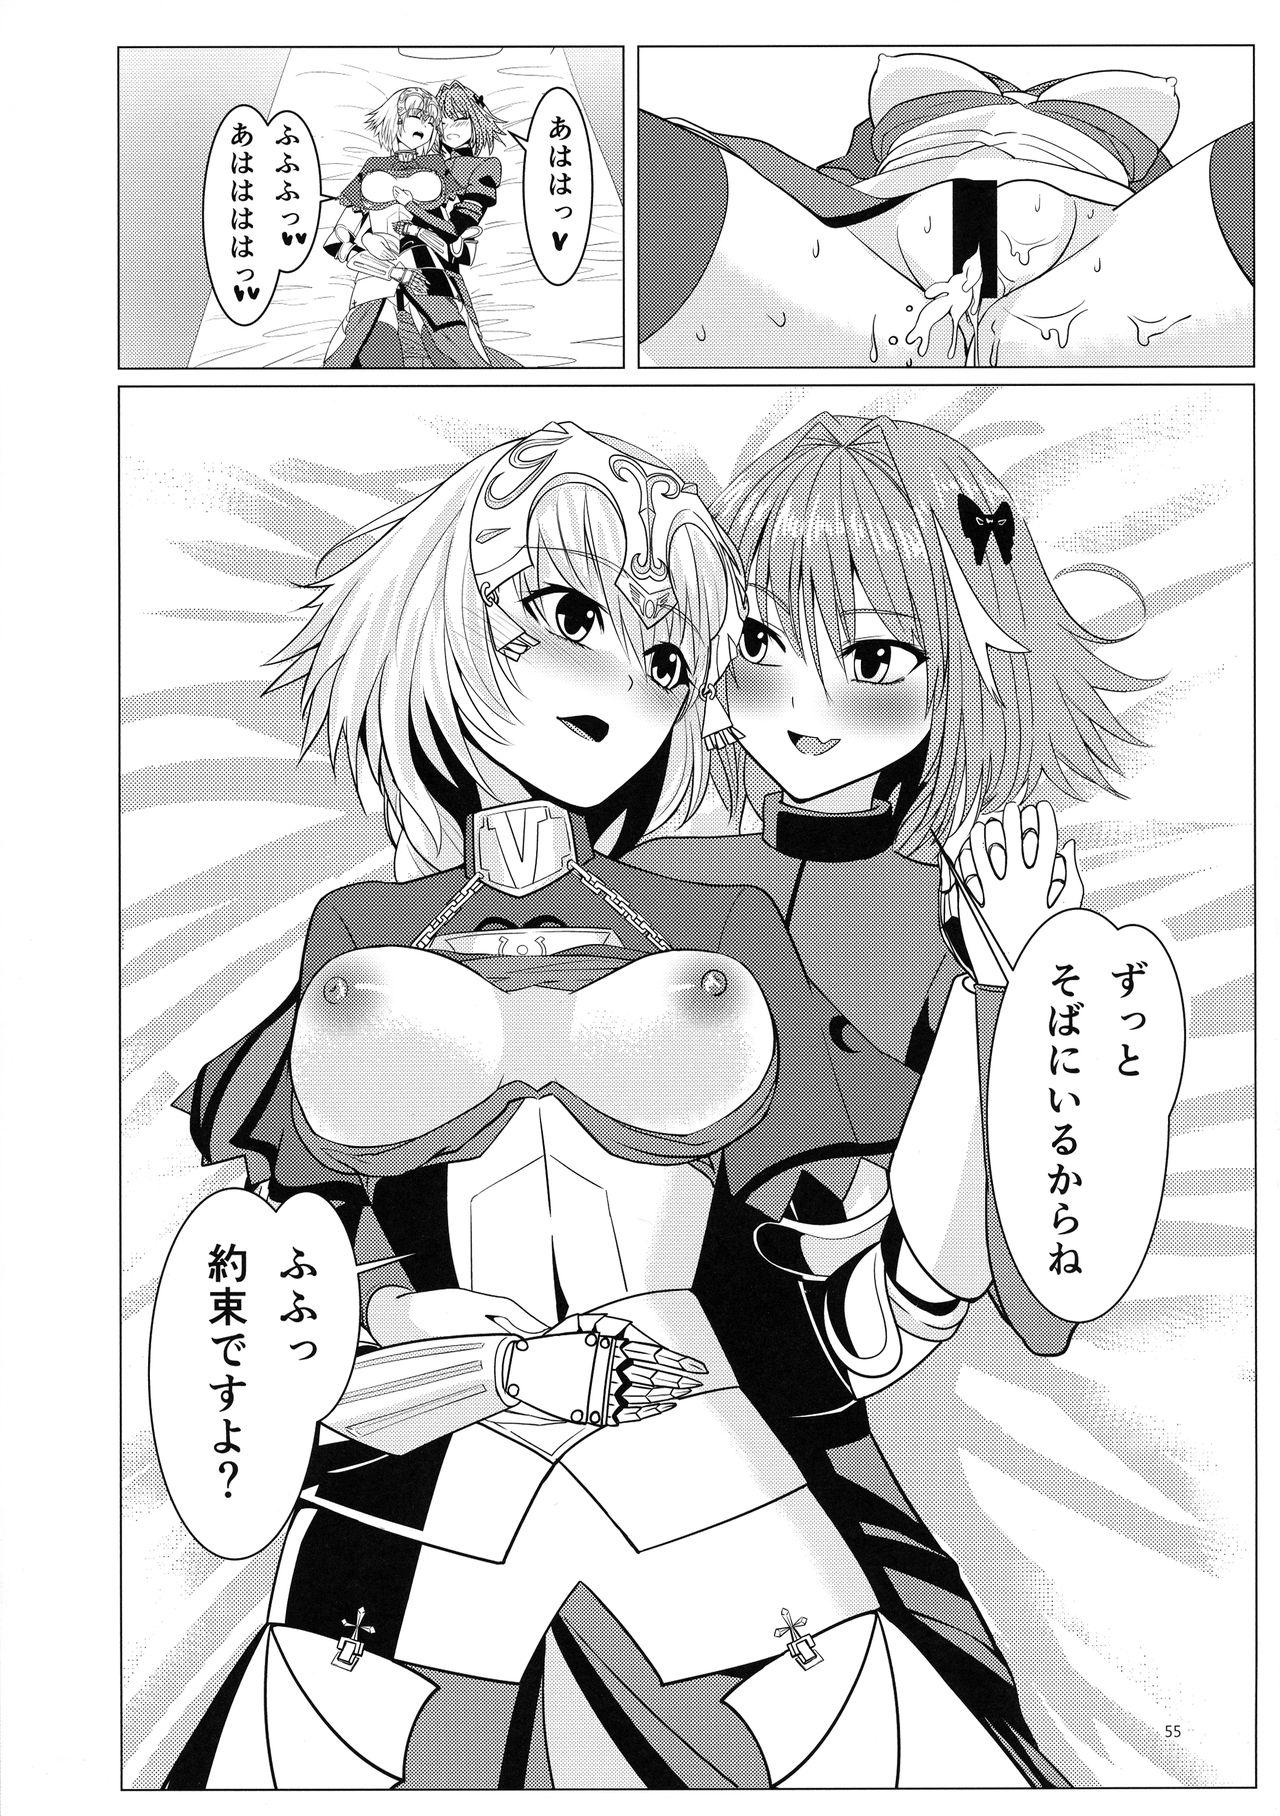 Matching Spirits - Jeanne and Astolfo have sex 51